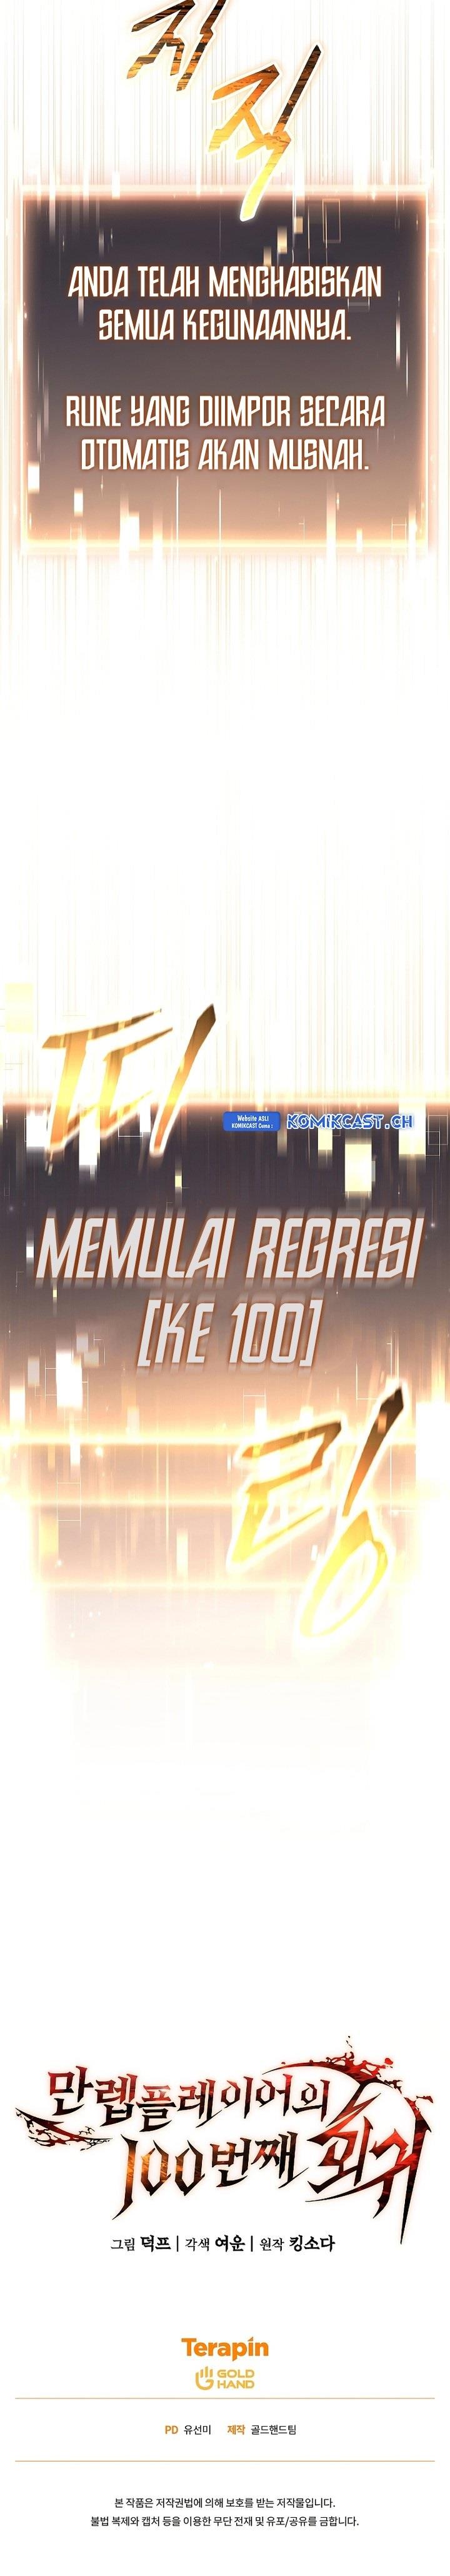 The Max-Level Player’s 100th Regression Chapter 00